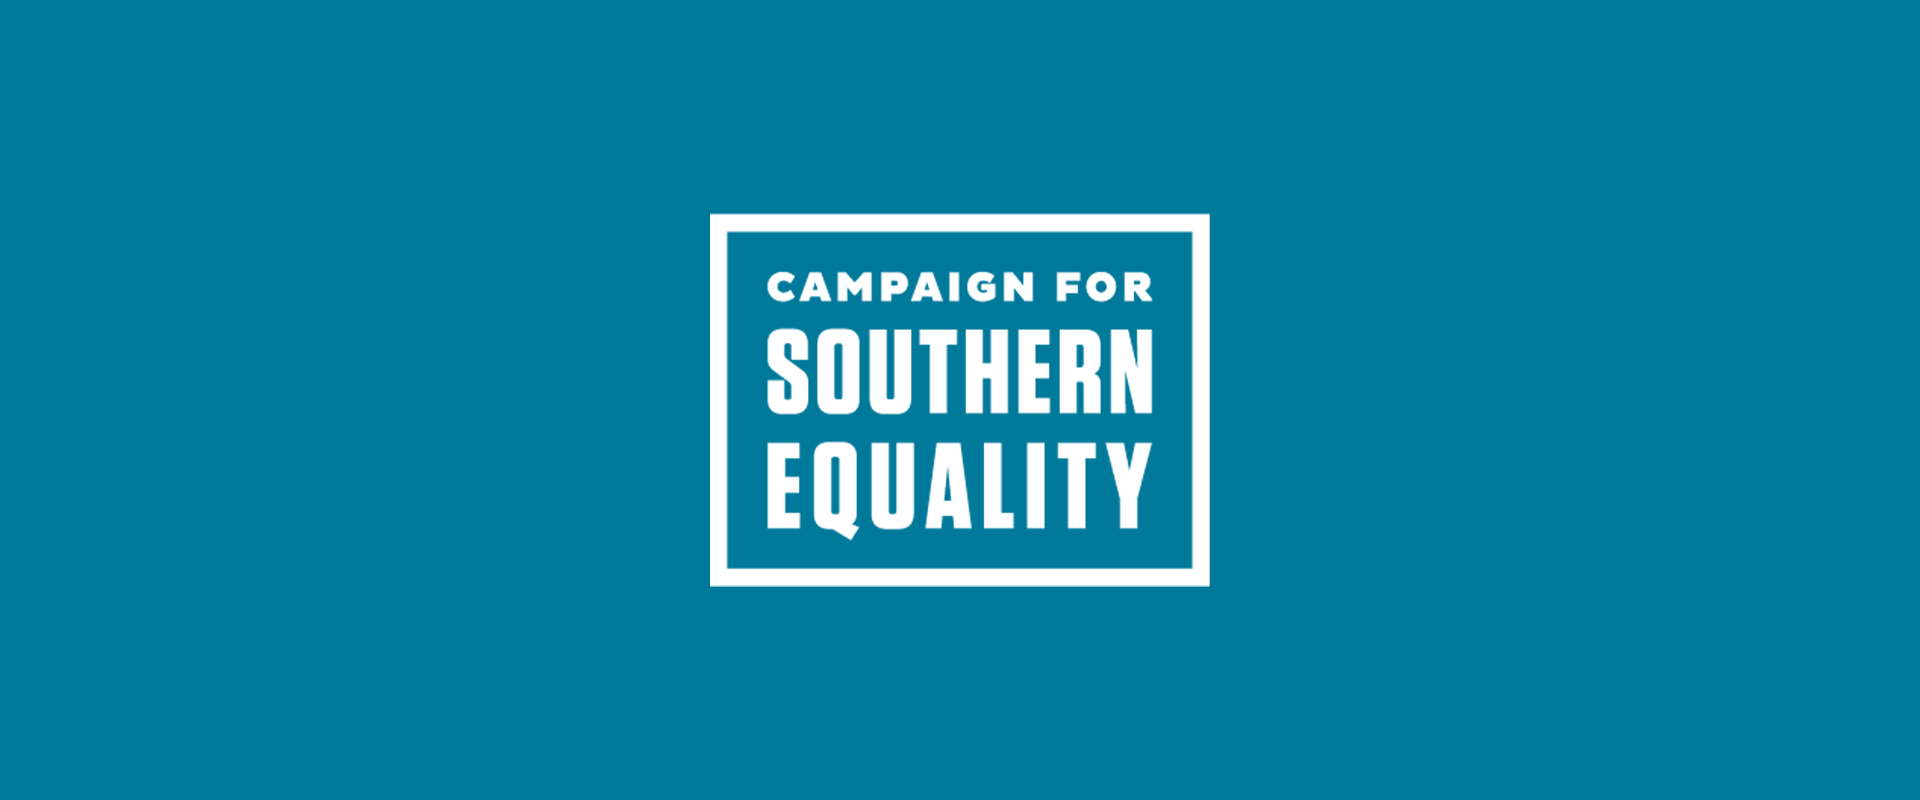 The southern equality logo